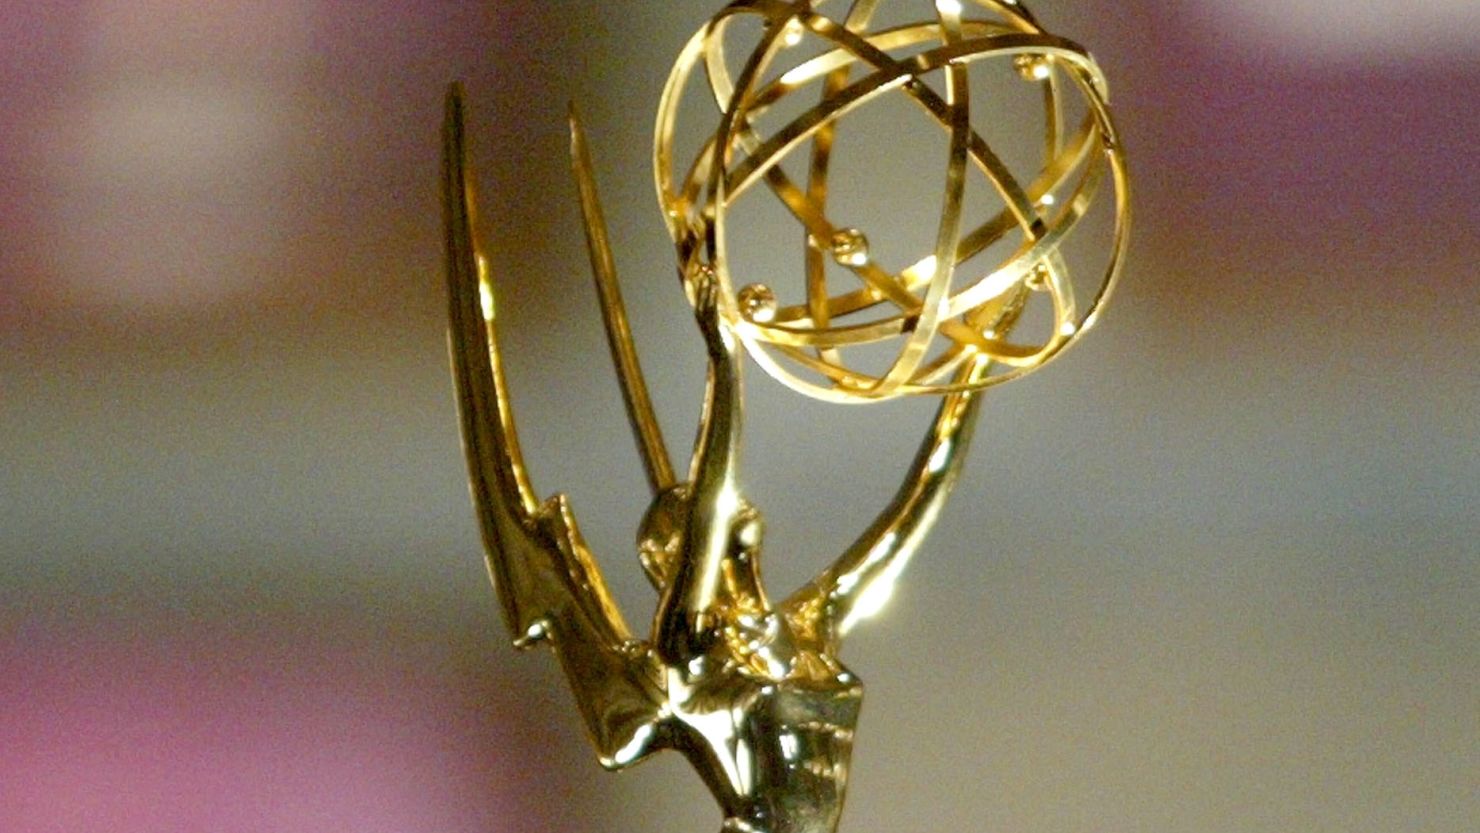 The entry deadline for the 2013 Emmy Awards is Friday, May 3.